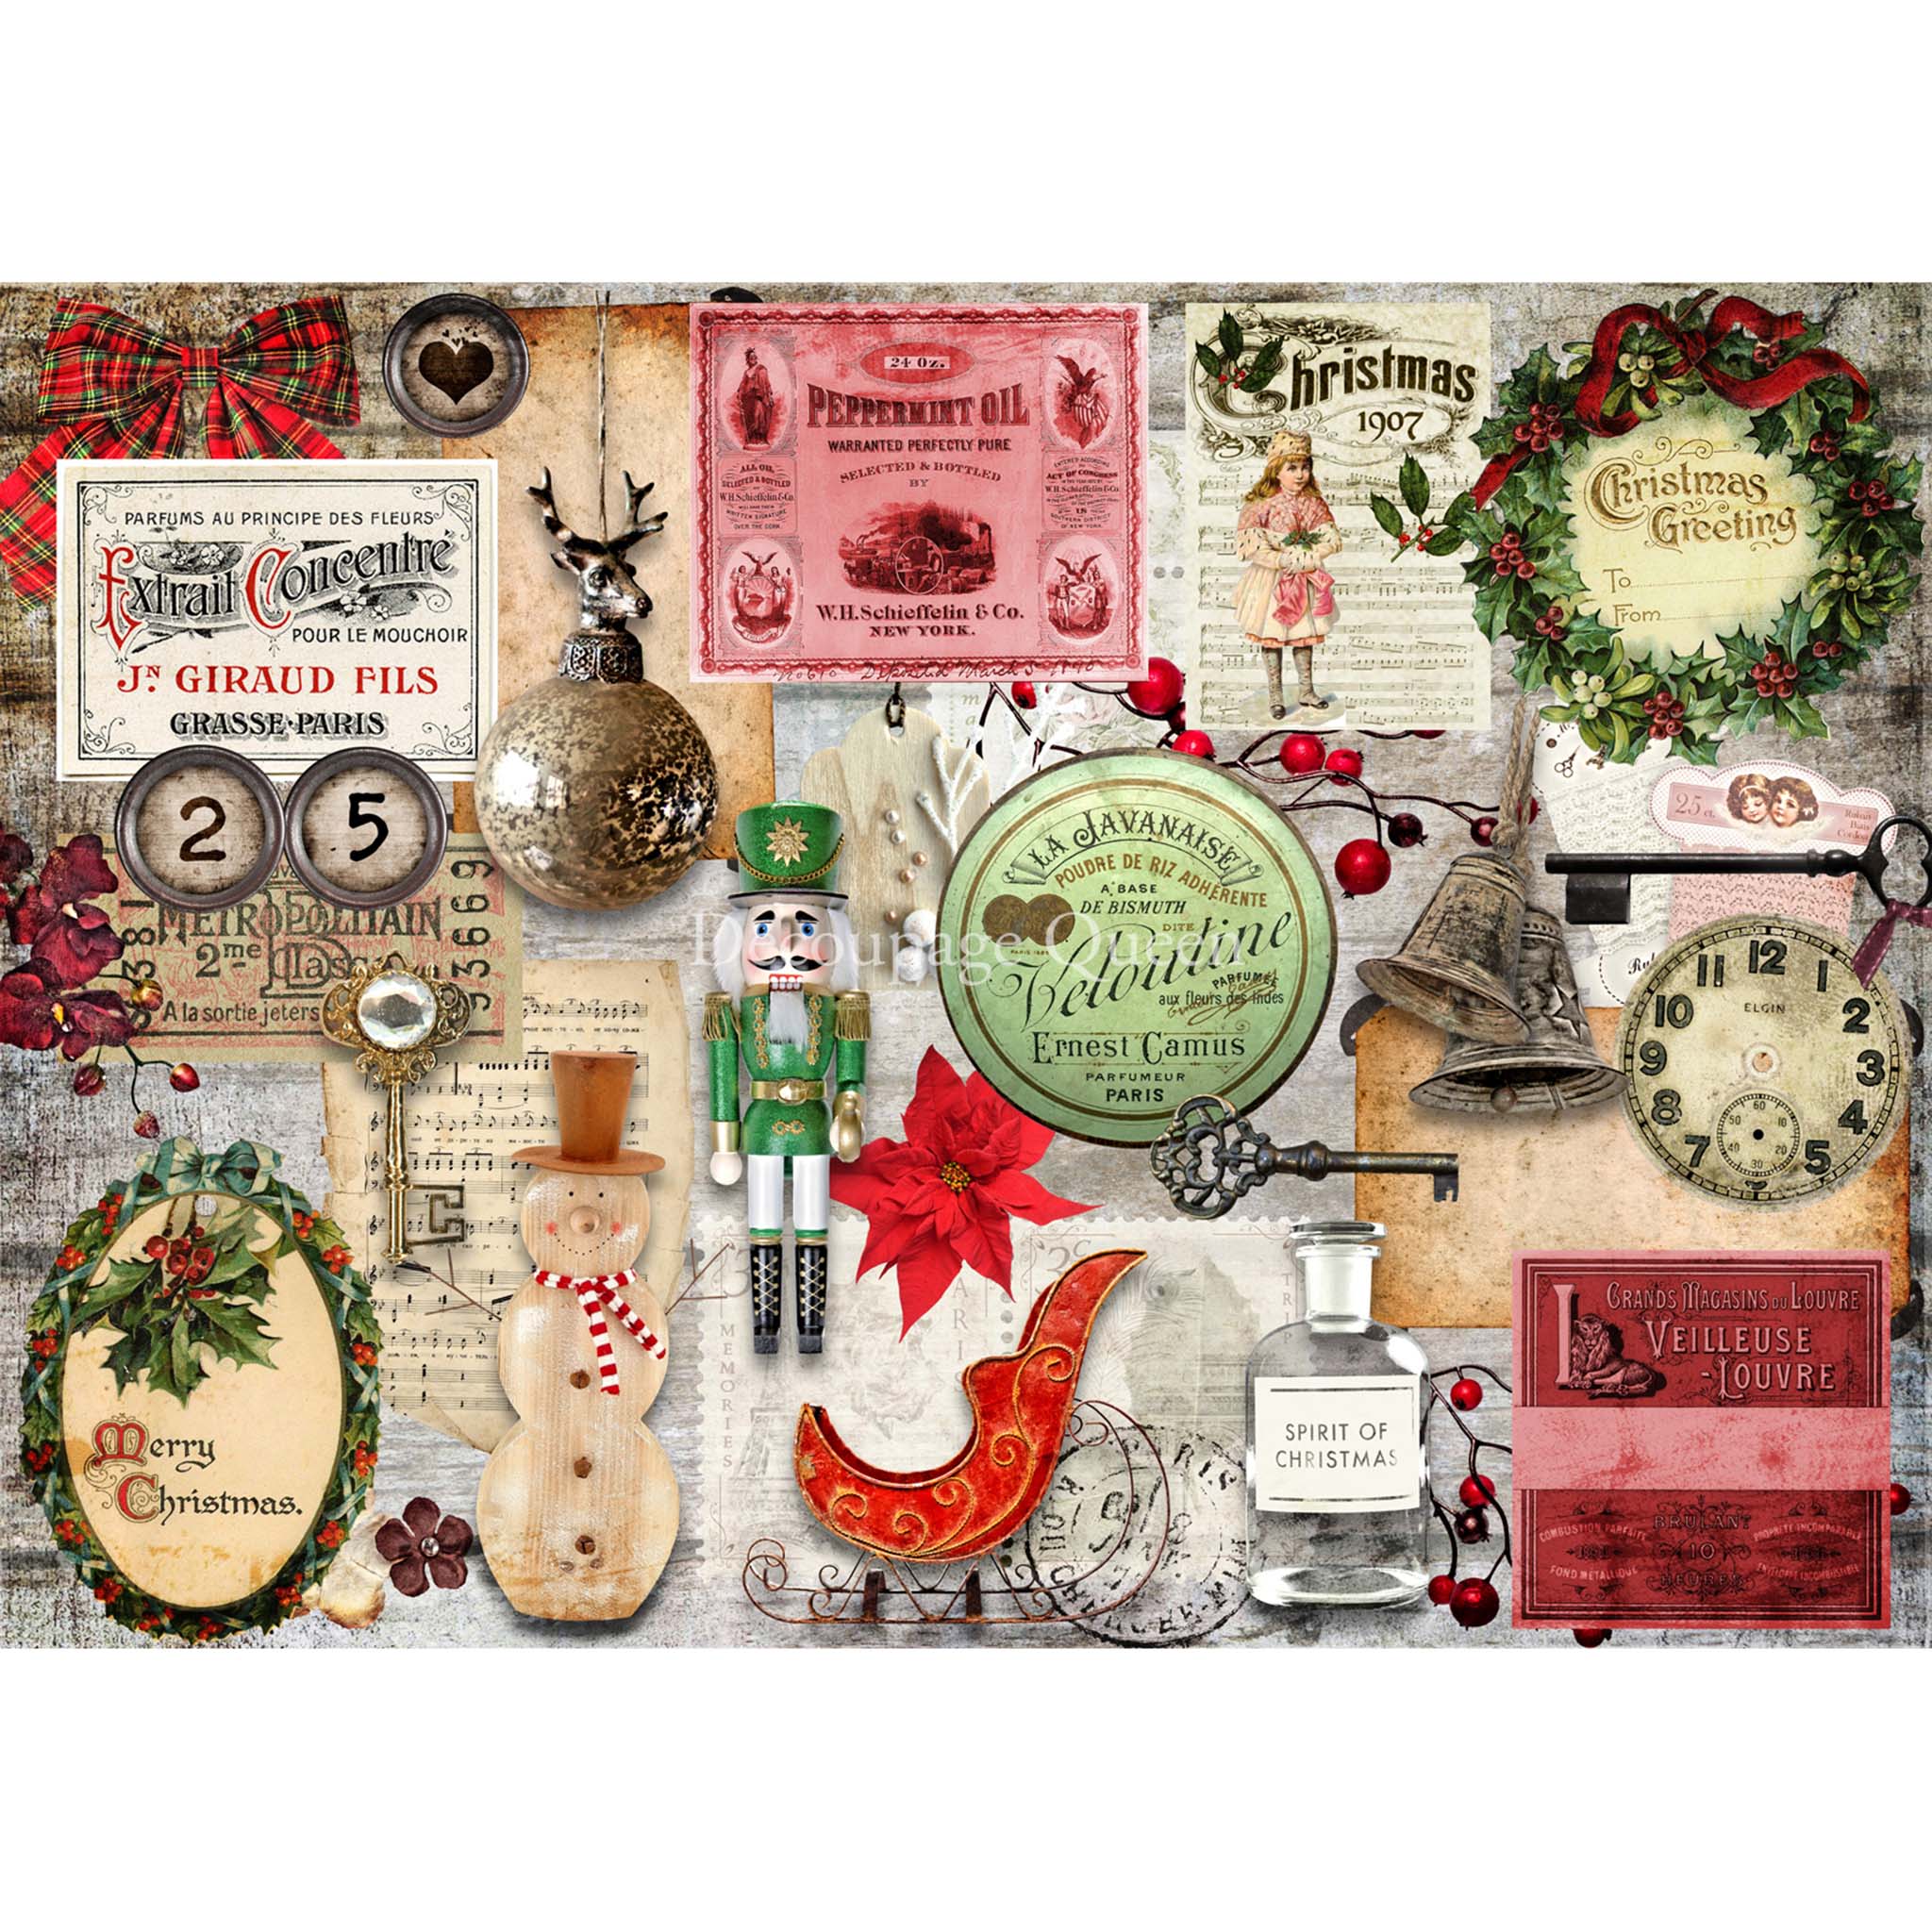 The Spirit Of Christmas A3 Rice Decoupage PaperA3 rice paper that features a collage of vintage Christmas decorations, ornaments, and sheet music White borders are on the top and bottom.